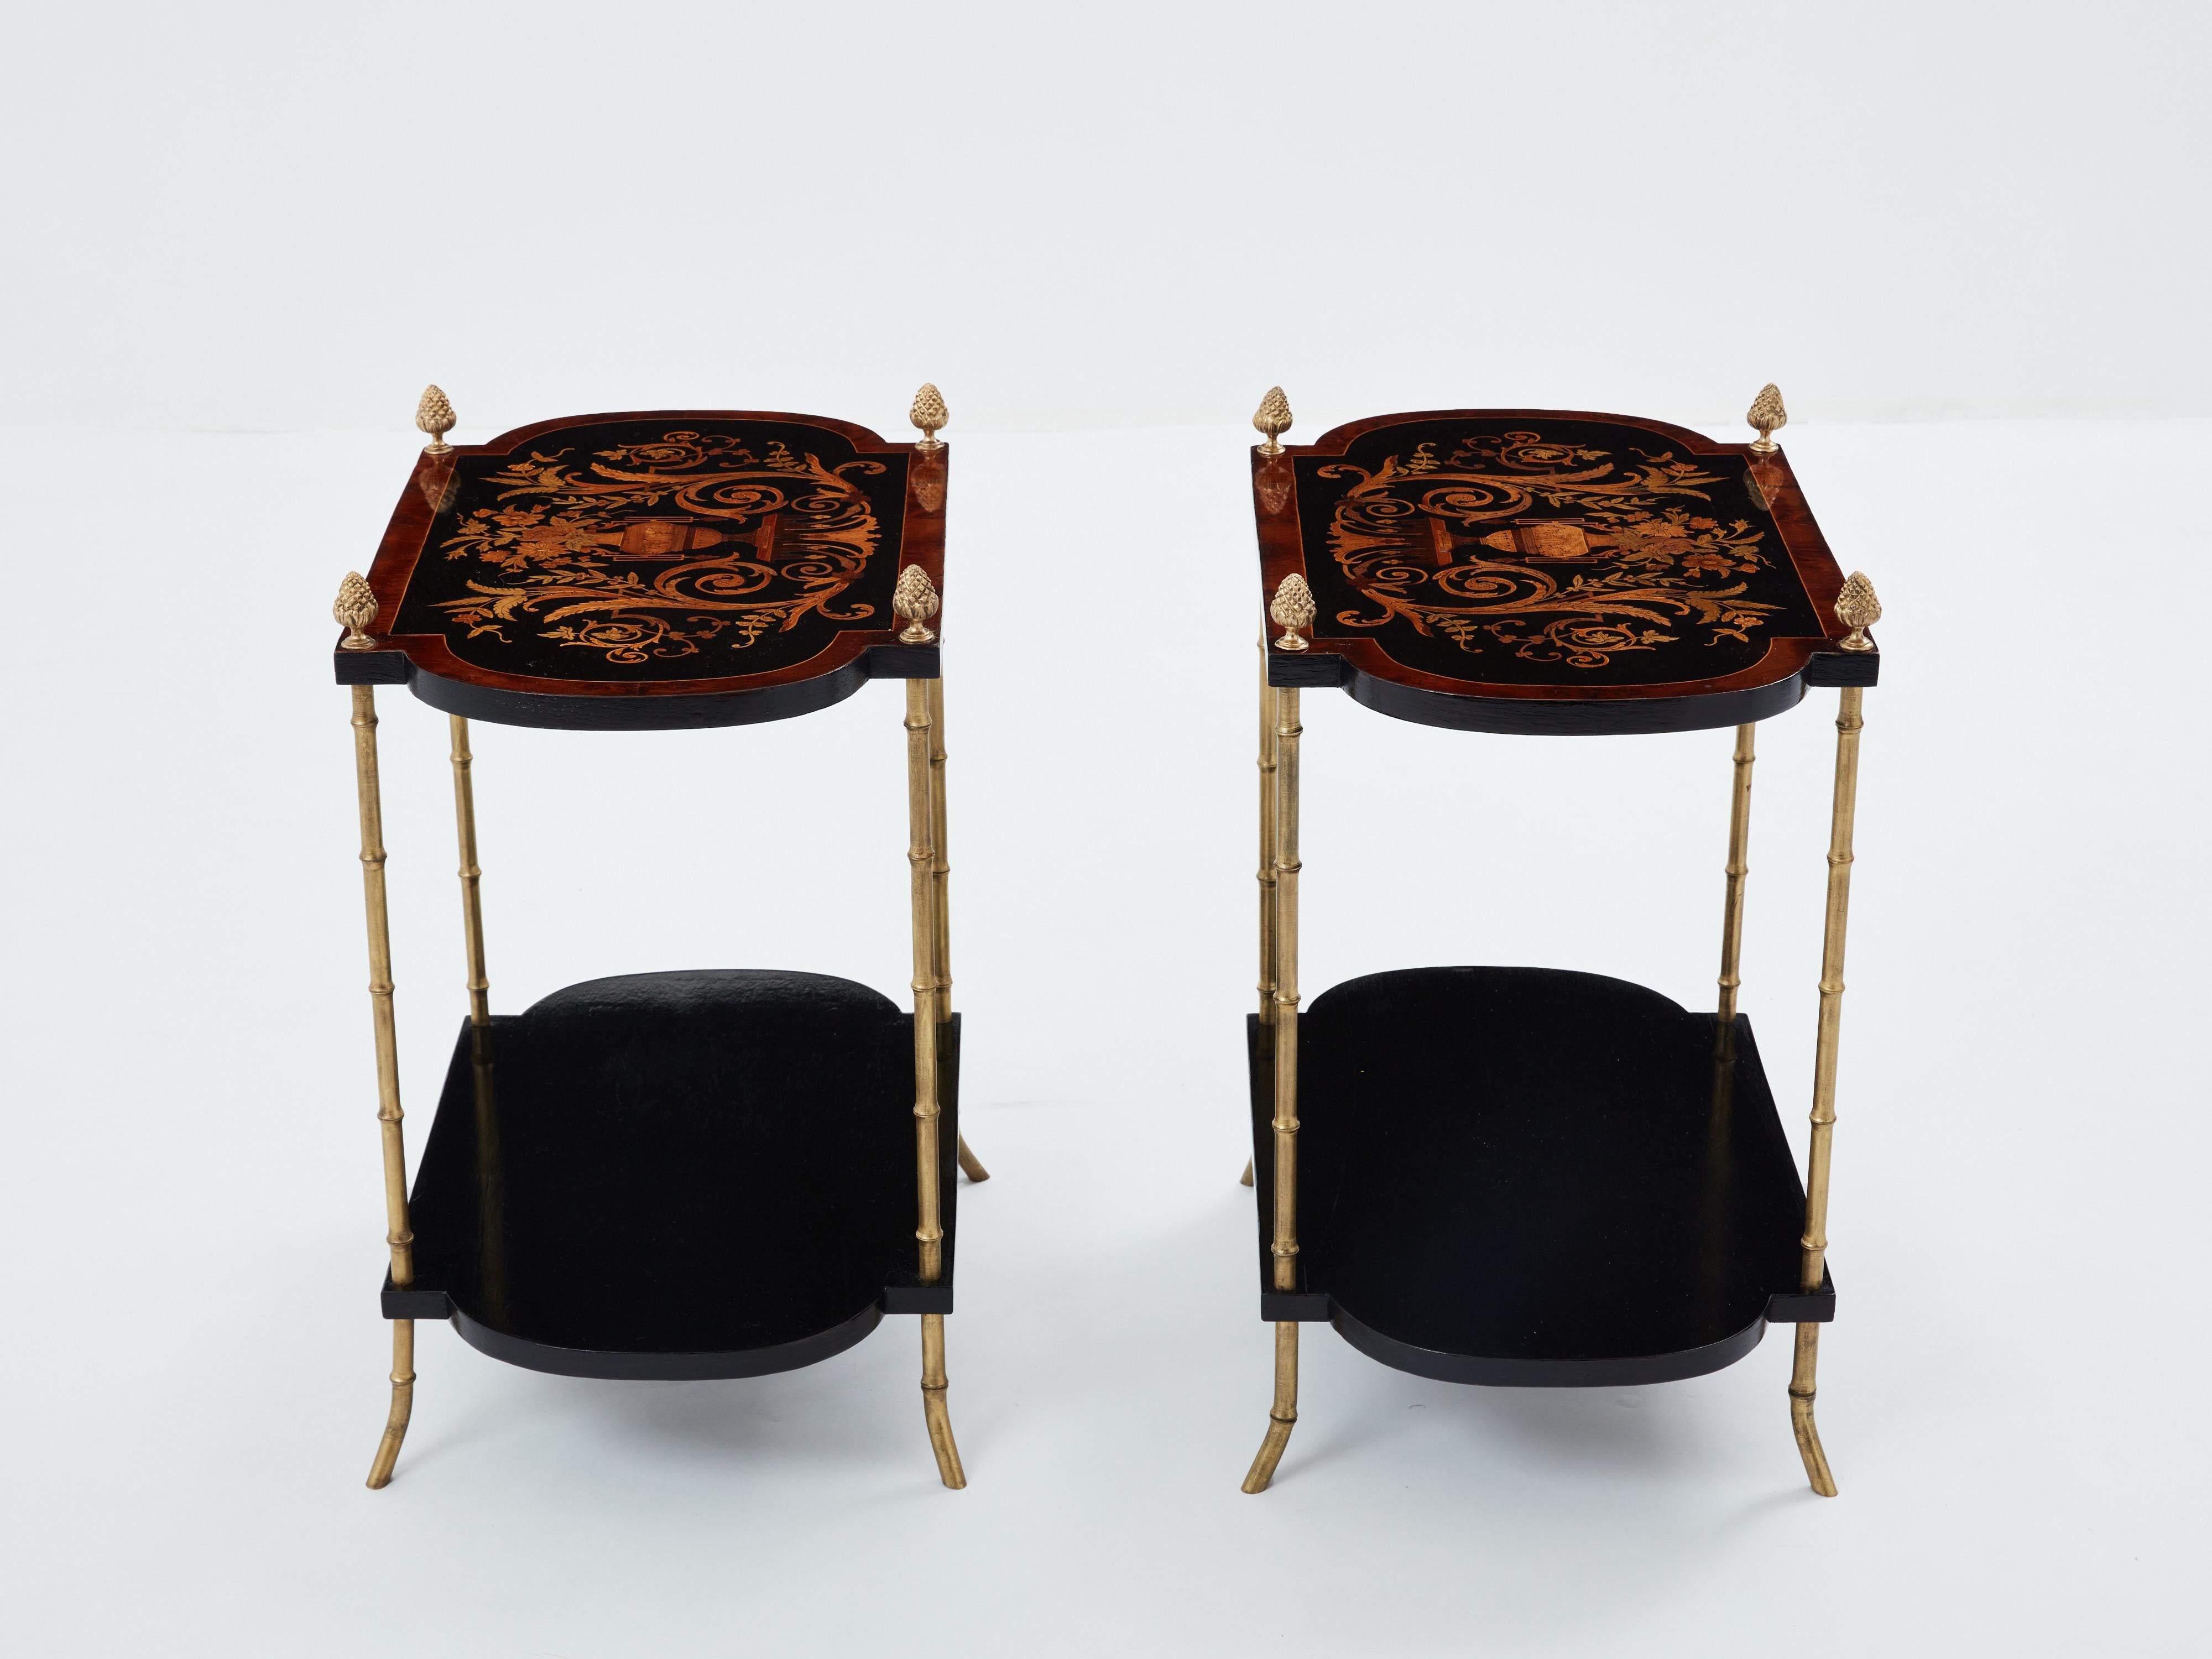 Art Deco Maison Baguès bronze bamboo wood marquetry side tables 1940s For Sale